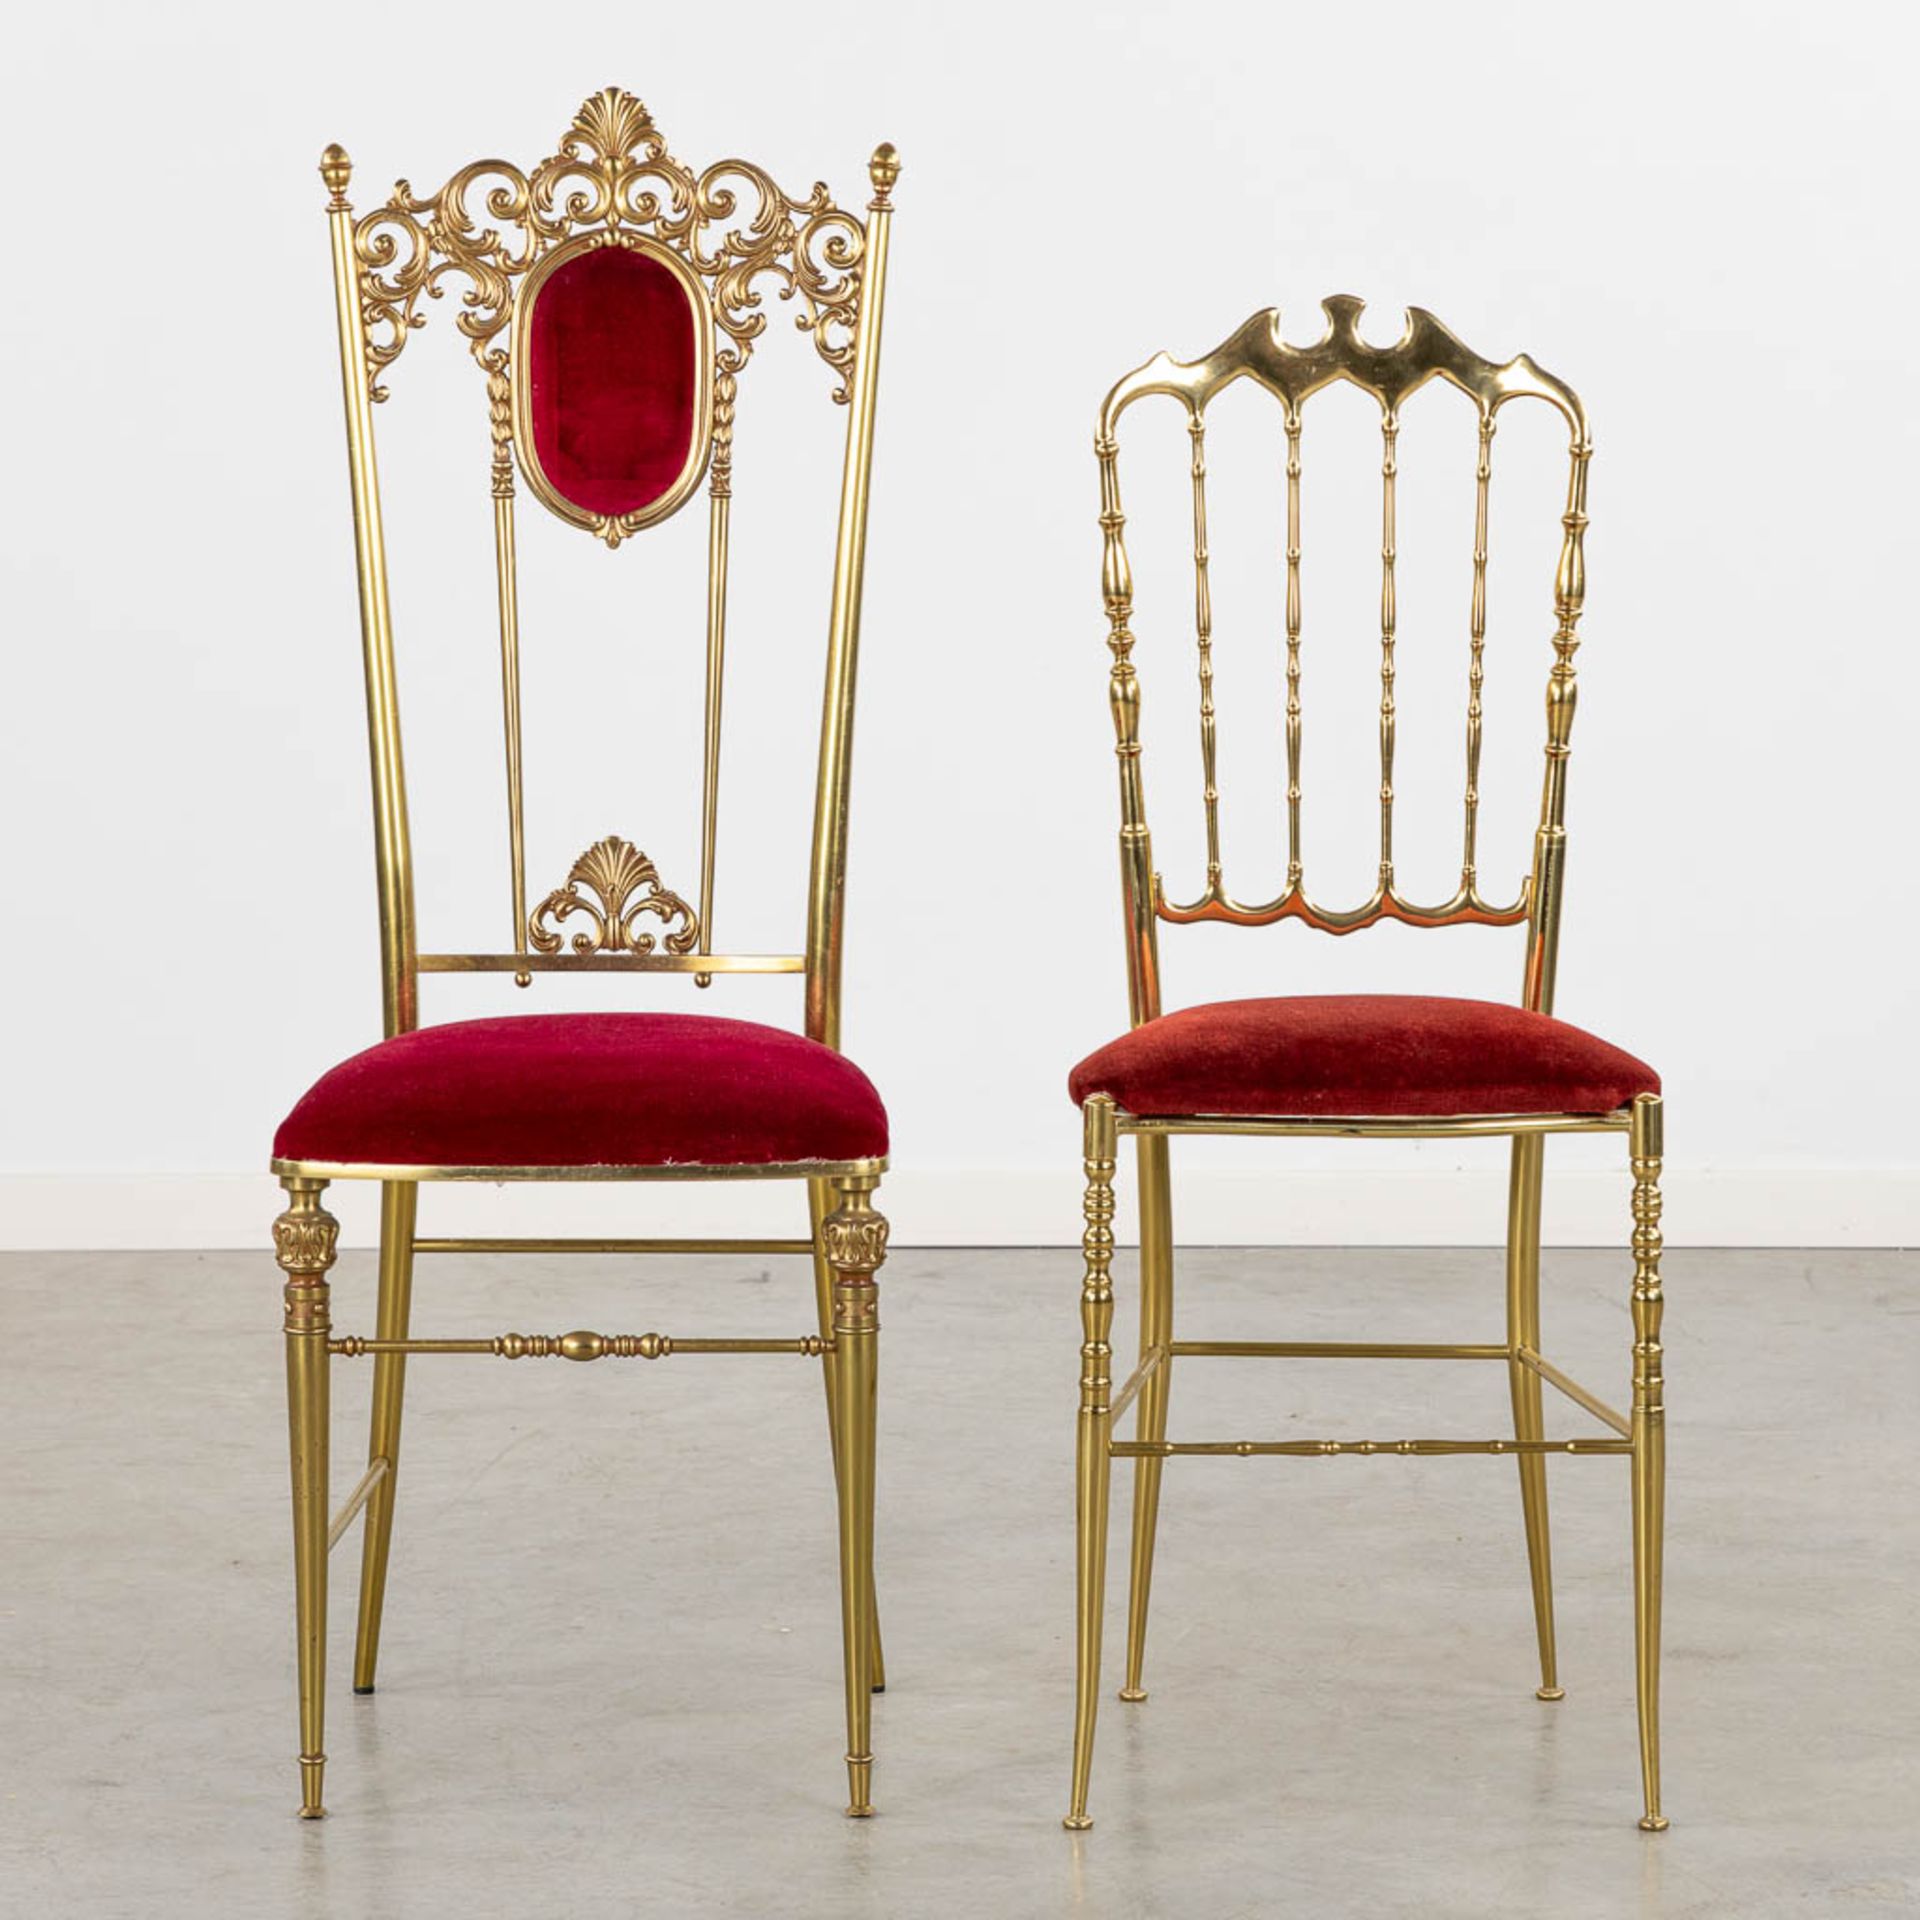 Two Metal and gilt chairs, circa 1970. (L:40 x W:40 x H:108 cm) - Image 3 of 10